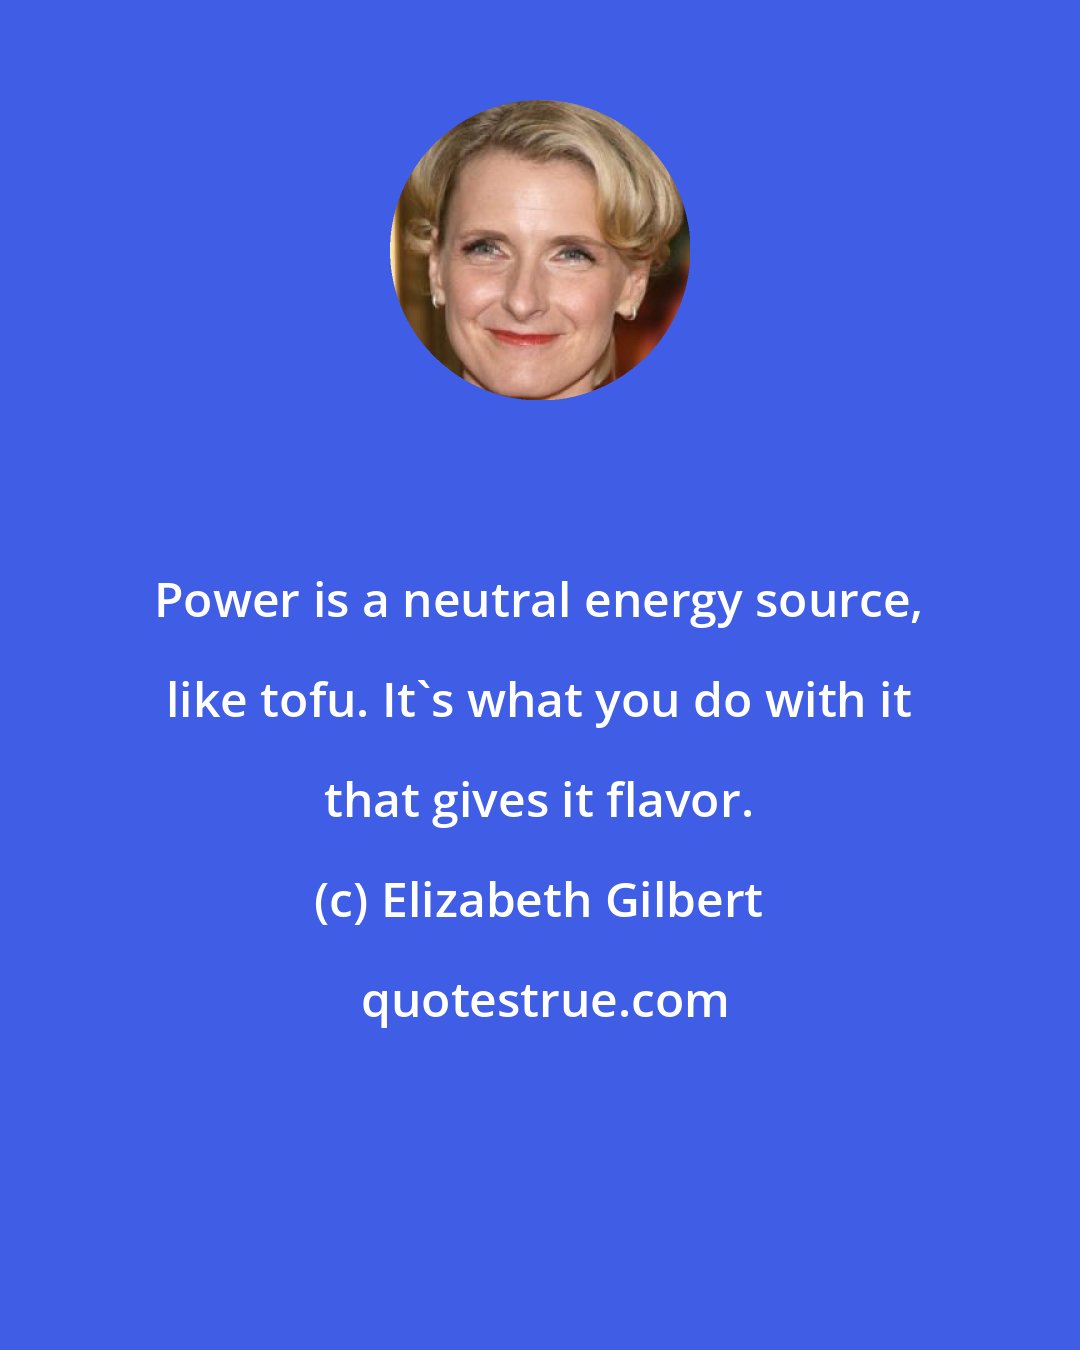 Elizabeth Gilbert: Power is a neutral energy source, like tofu. It's what you do with it that gives it flavor.